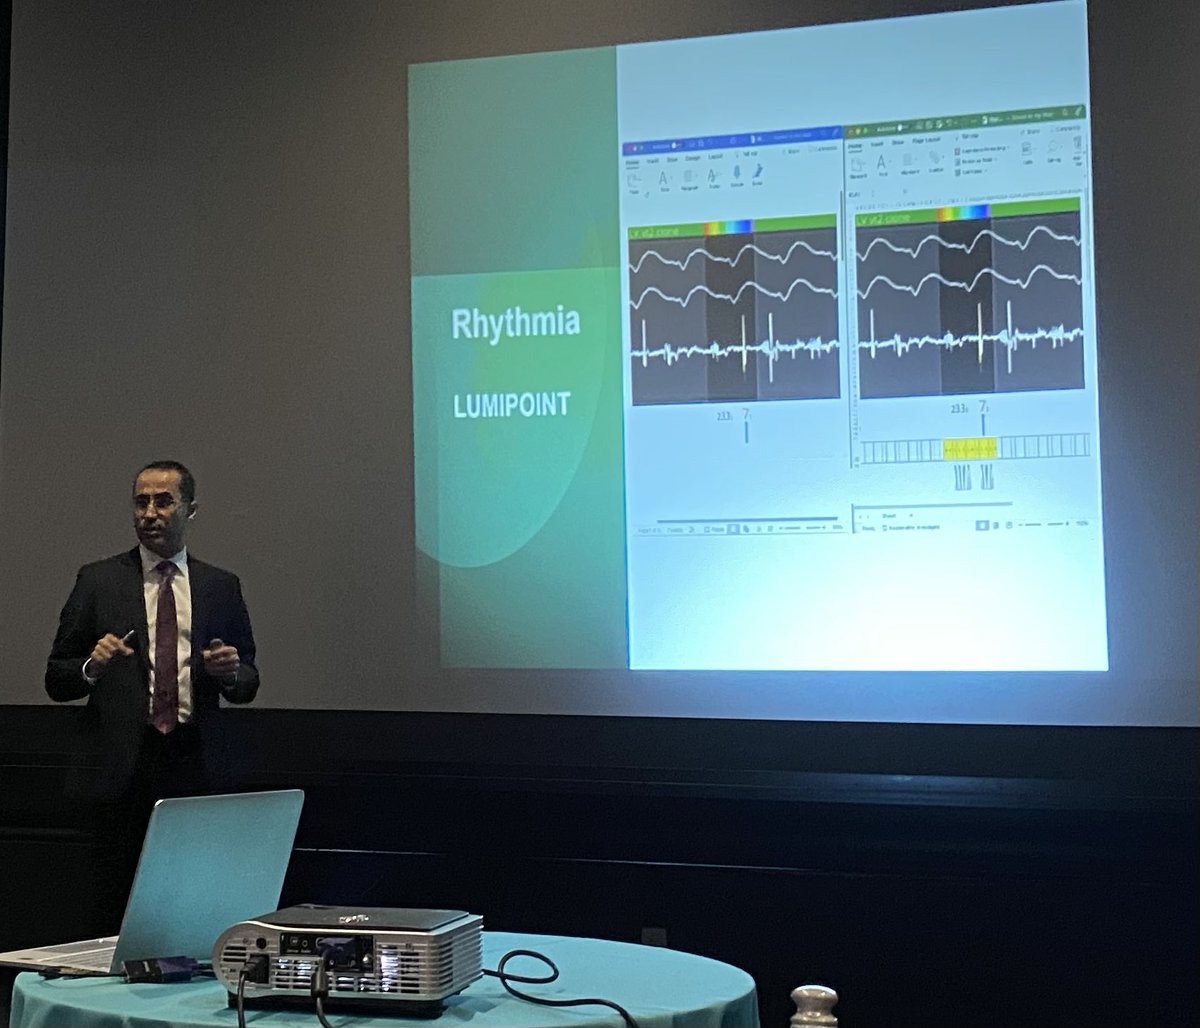 Grateful to have @ZiadIssaMD visit Phoenix and present on VT mapping with Rhythmia at the monthly ARZ EP Society Meeting @OdySeaAquarium + amazing learning from case discussions with @Peteweissmd @DrRoderickTung @su_wilber